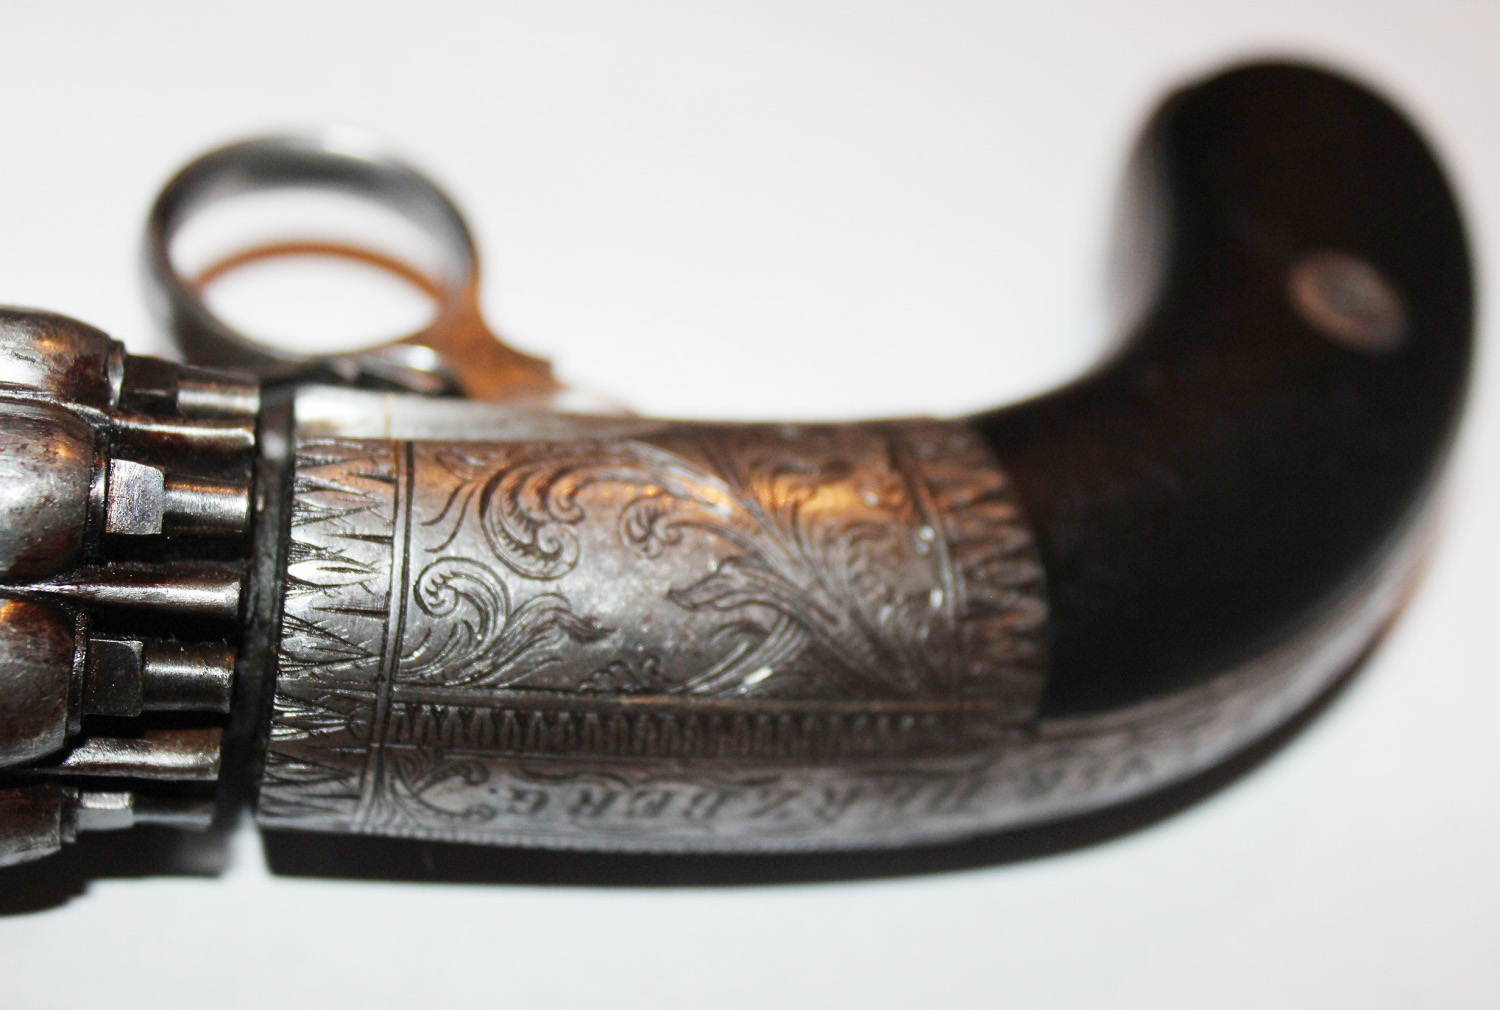 percussion pepperbox made by H.W. Kramer